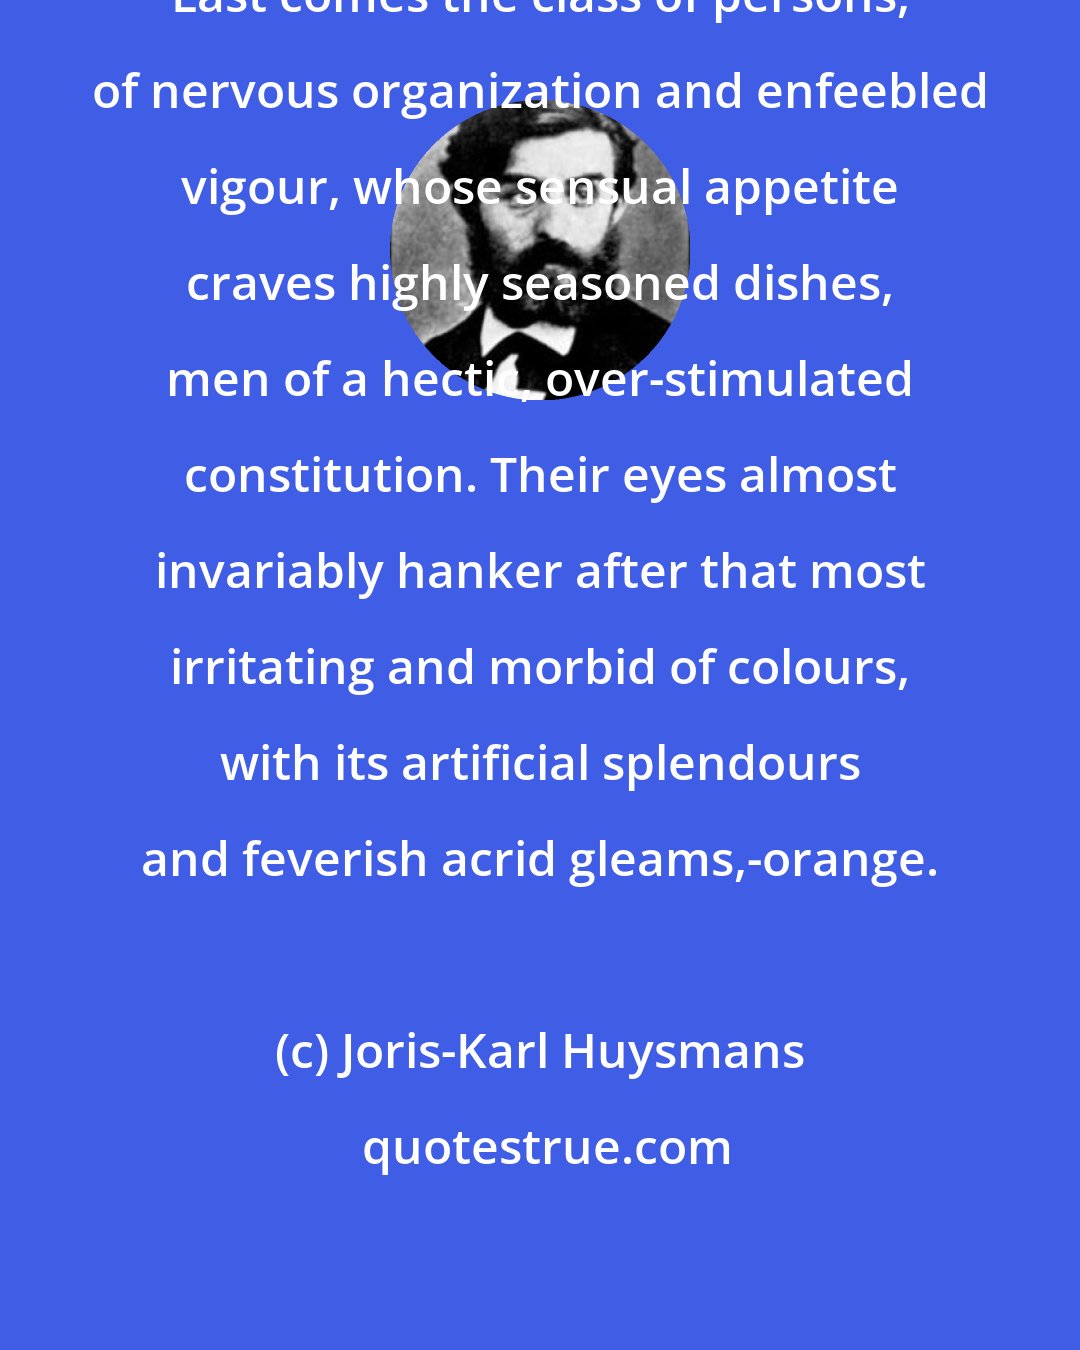 Joris-Karl Huysmans: Last comes the class of persons, of nervous organization and enfeebled vigour, whose sensual appetite craves highly seasoned dishes, men of a hectic, over-stimulated constitution. Their eyes almost invariably hanker after that most irritating and morbid of colours, with its artificial splendours and feverish acrid gleams,-orange.